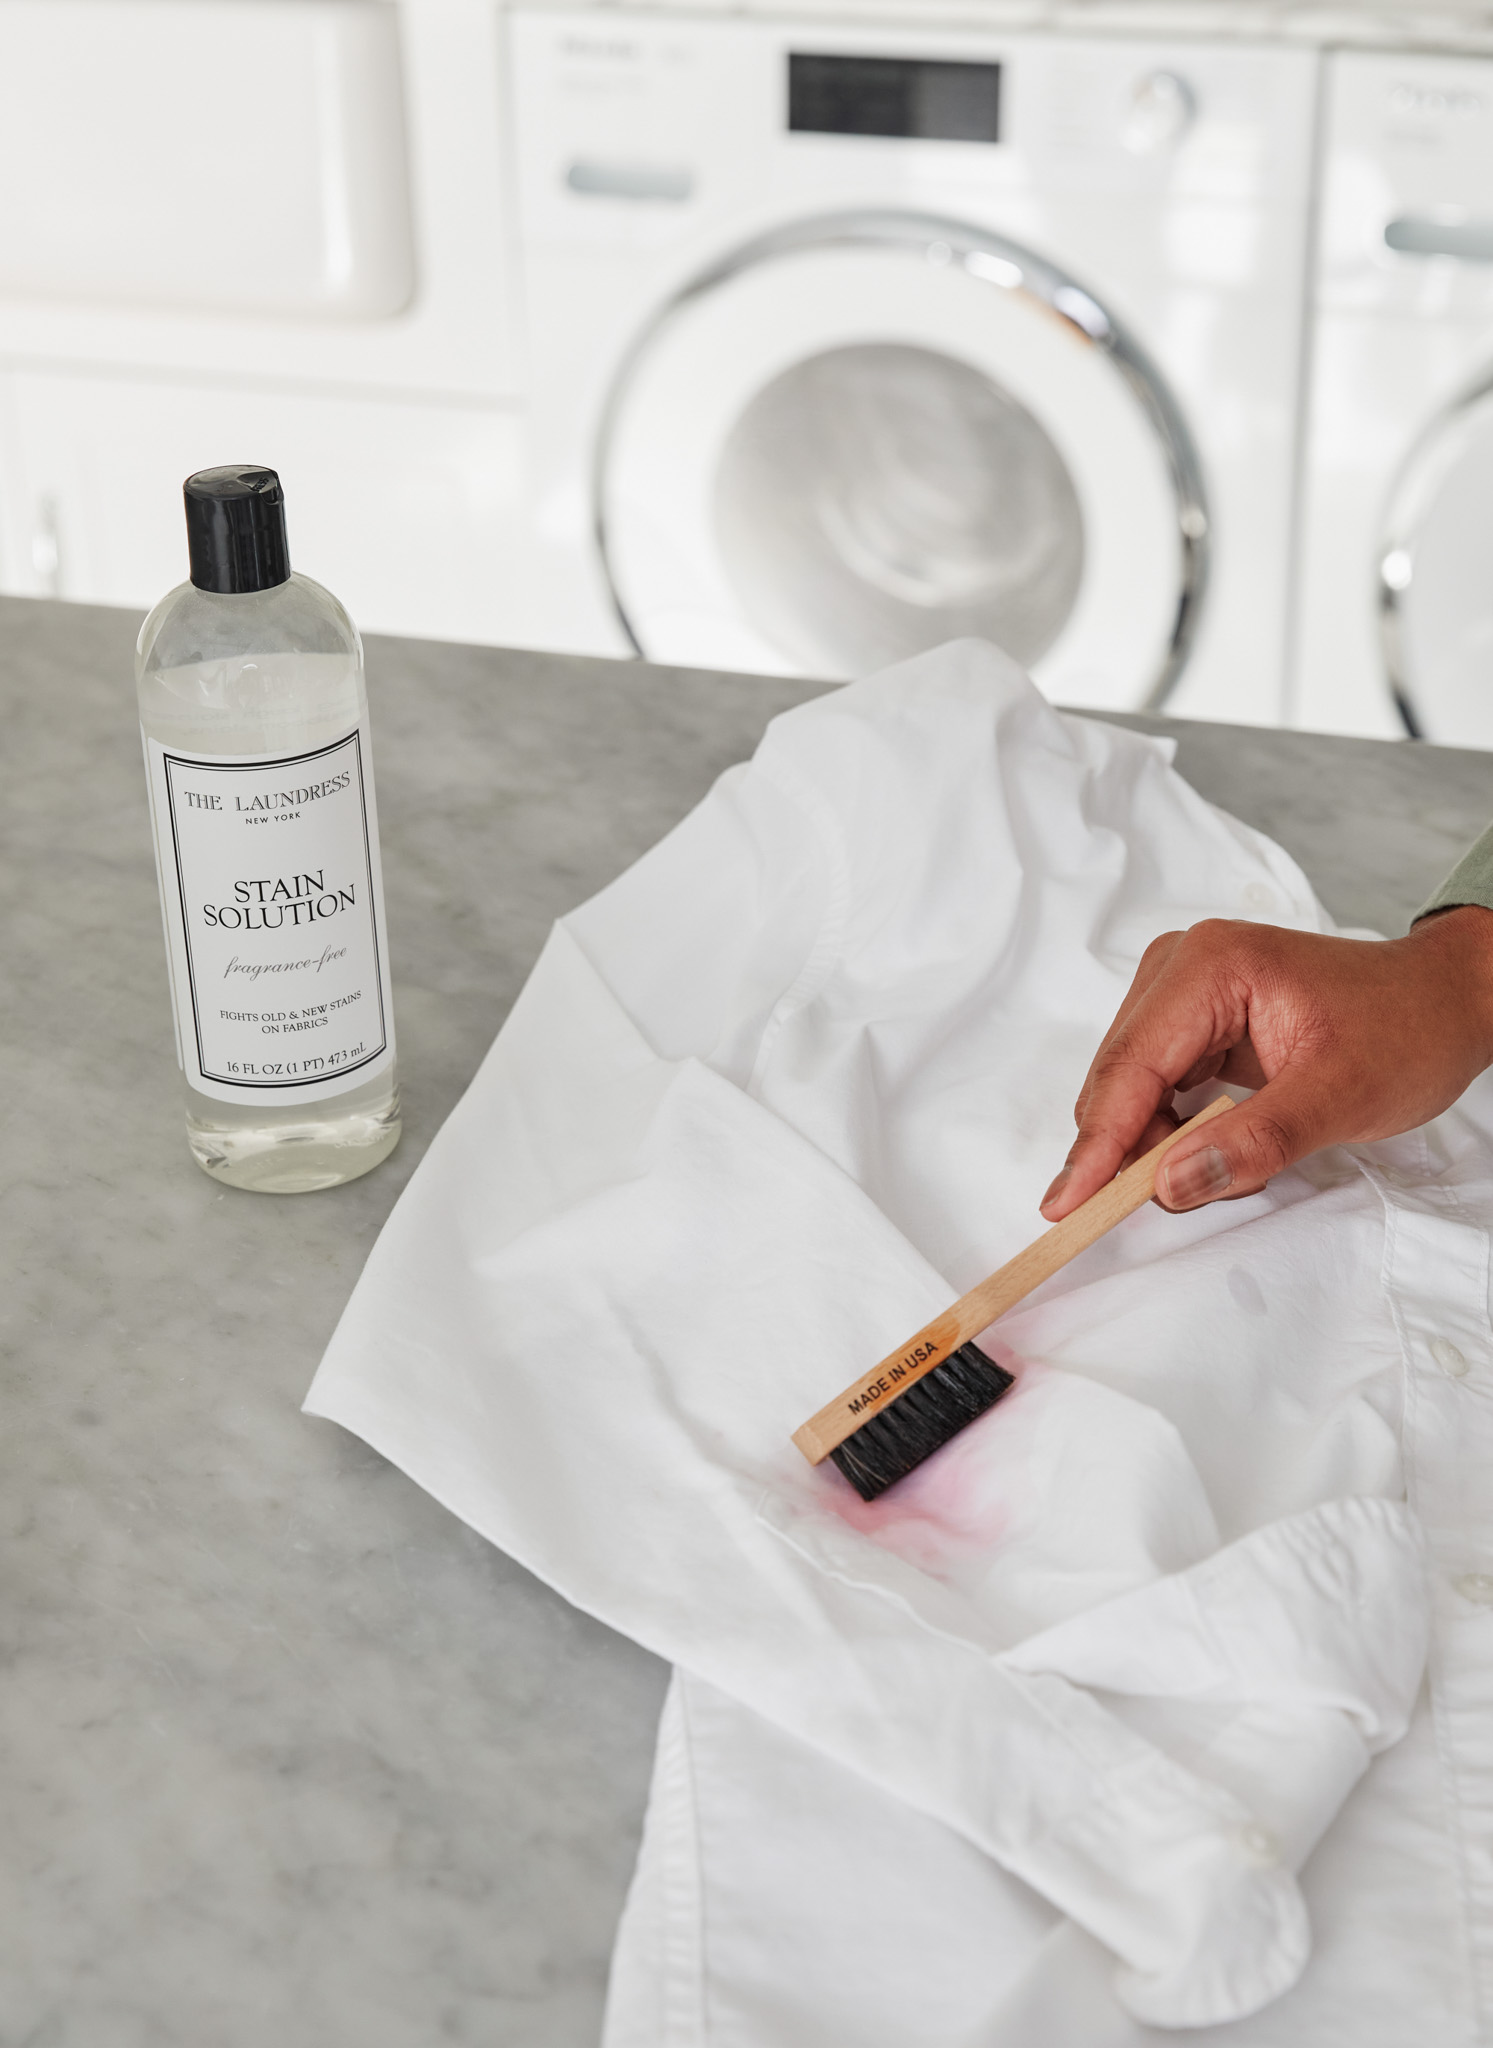 How To Remove Pen Stains – The Laundress